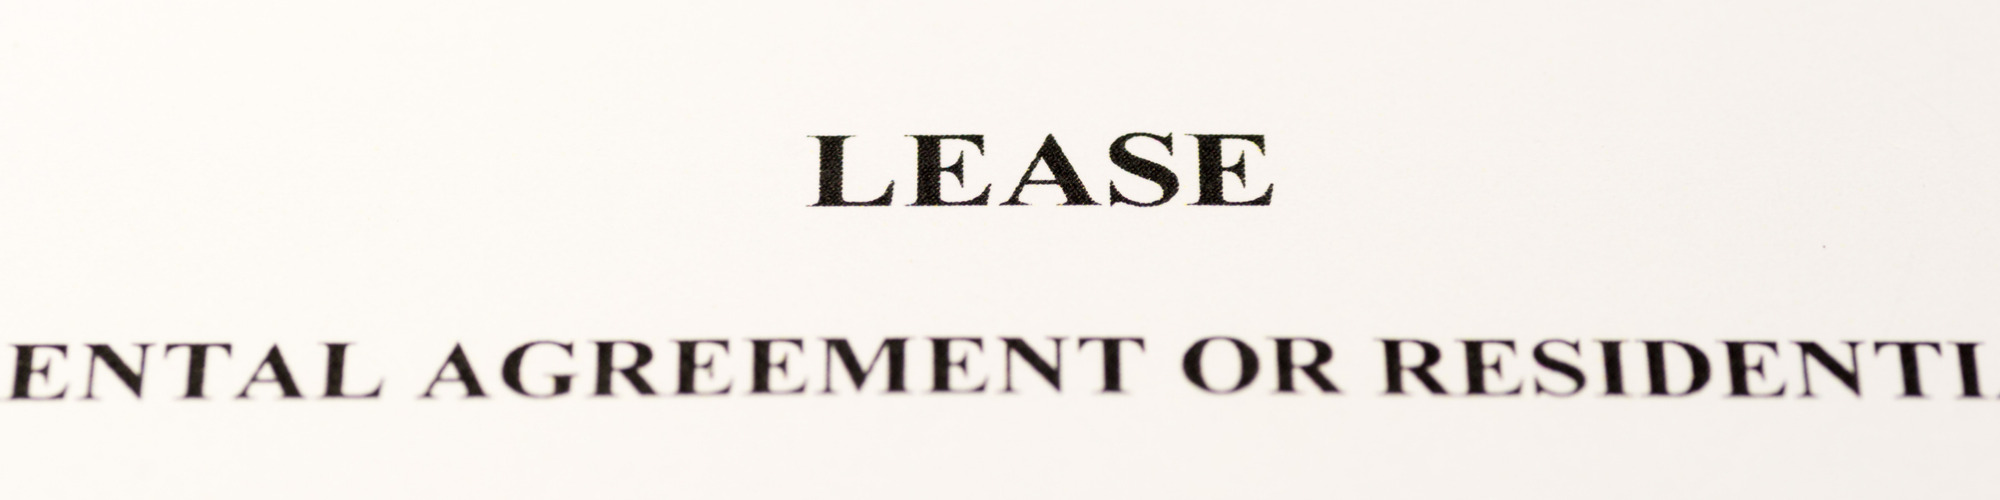 Commercial Leases in Scotland - Drafting & Negotiation Live at Your Desk